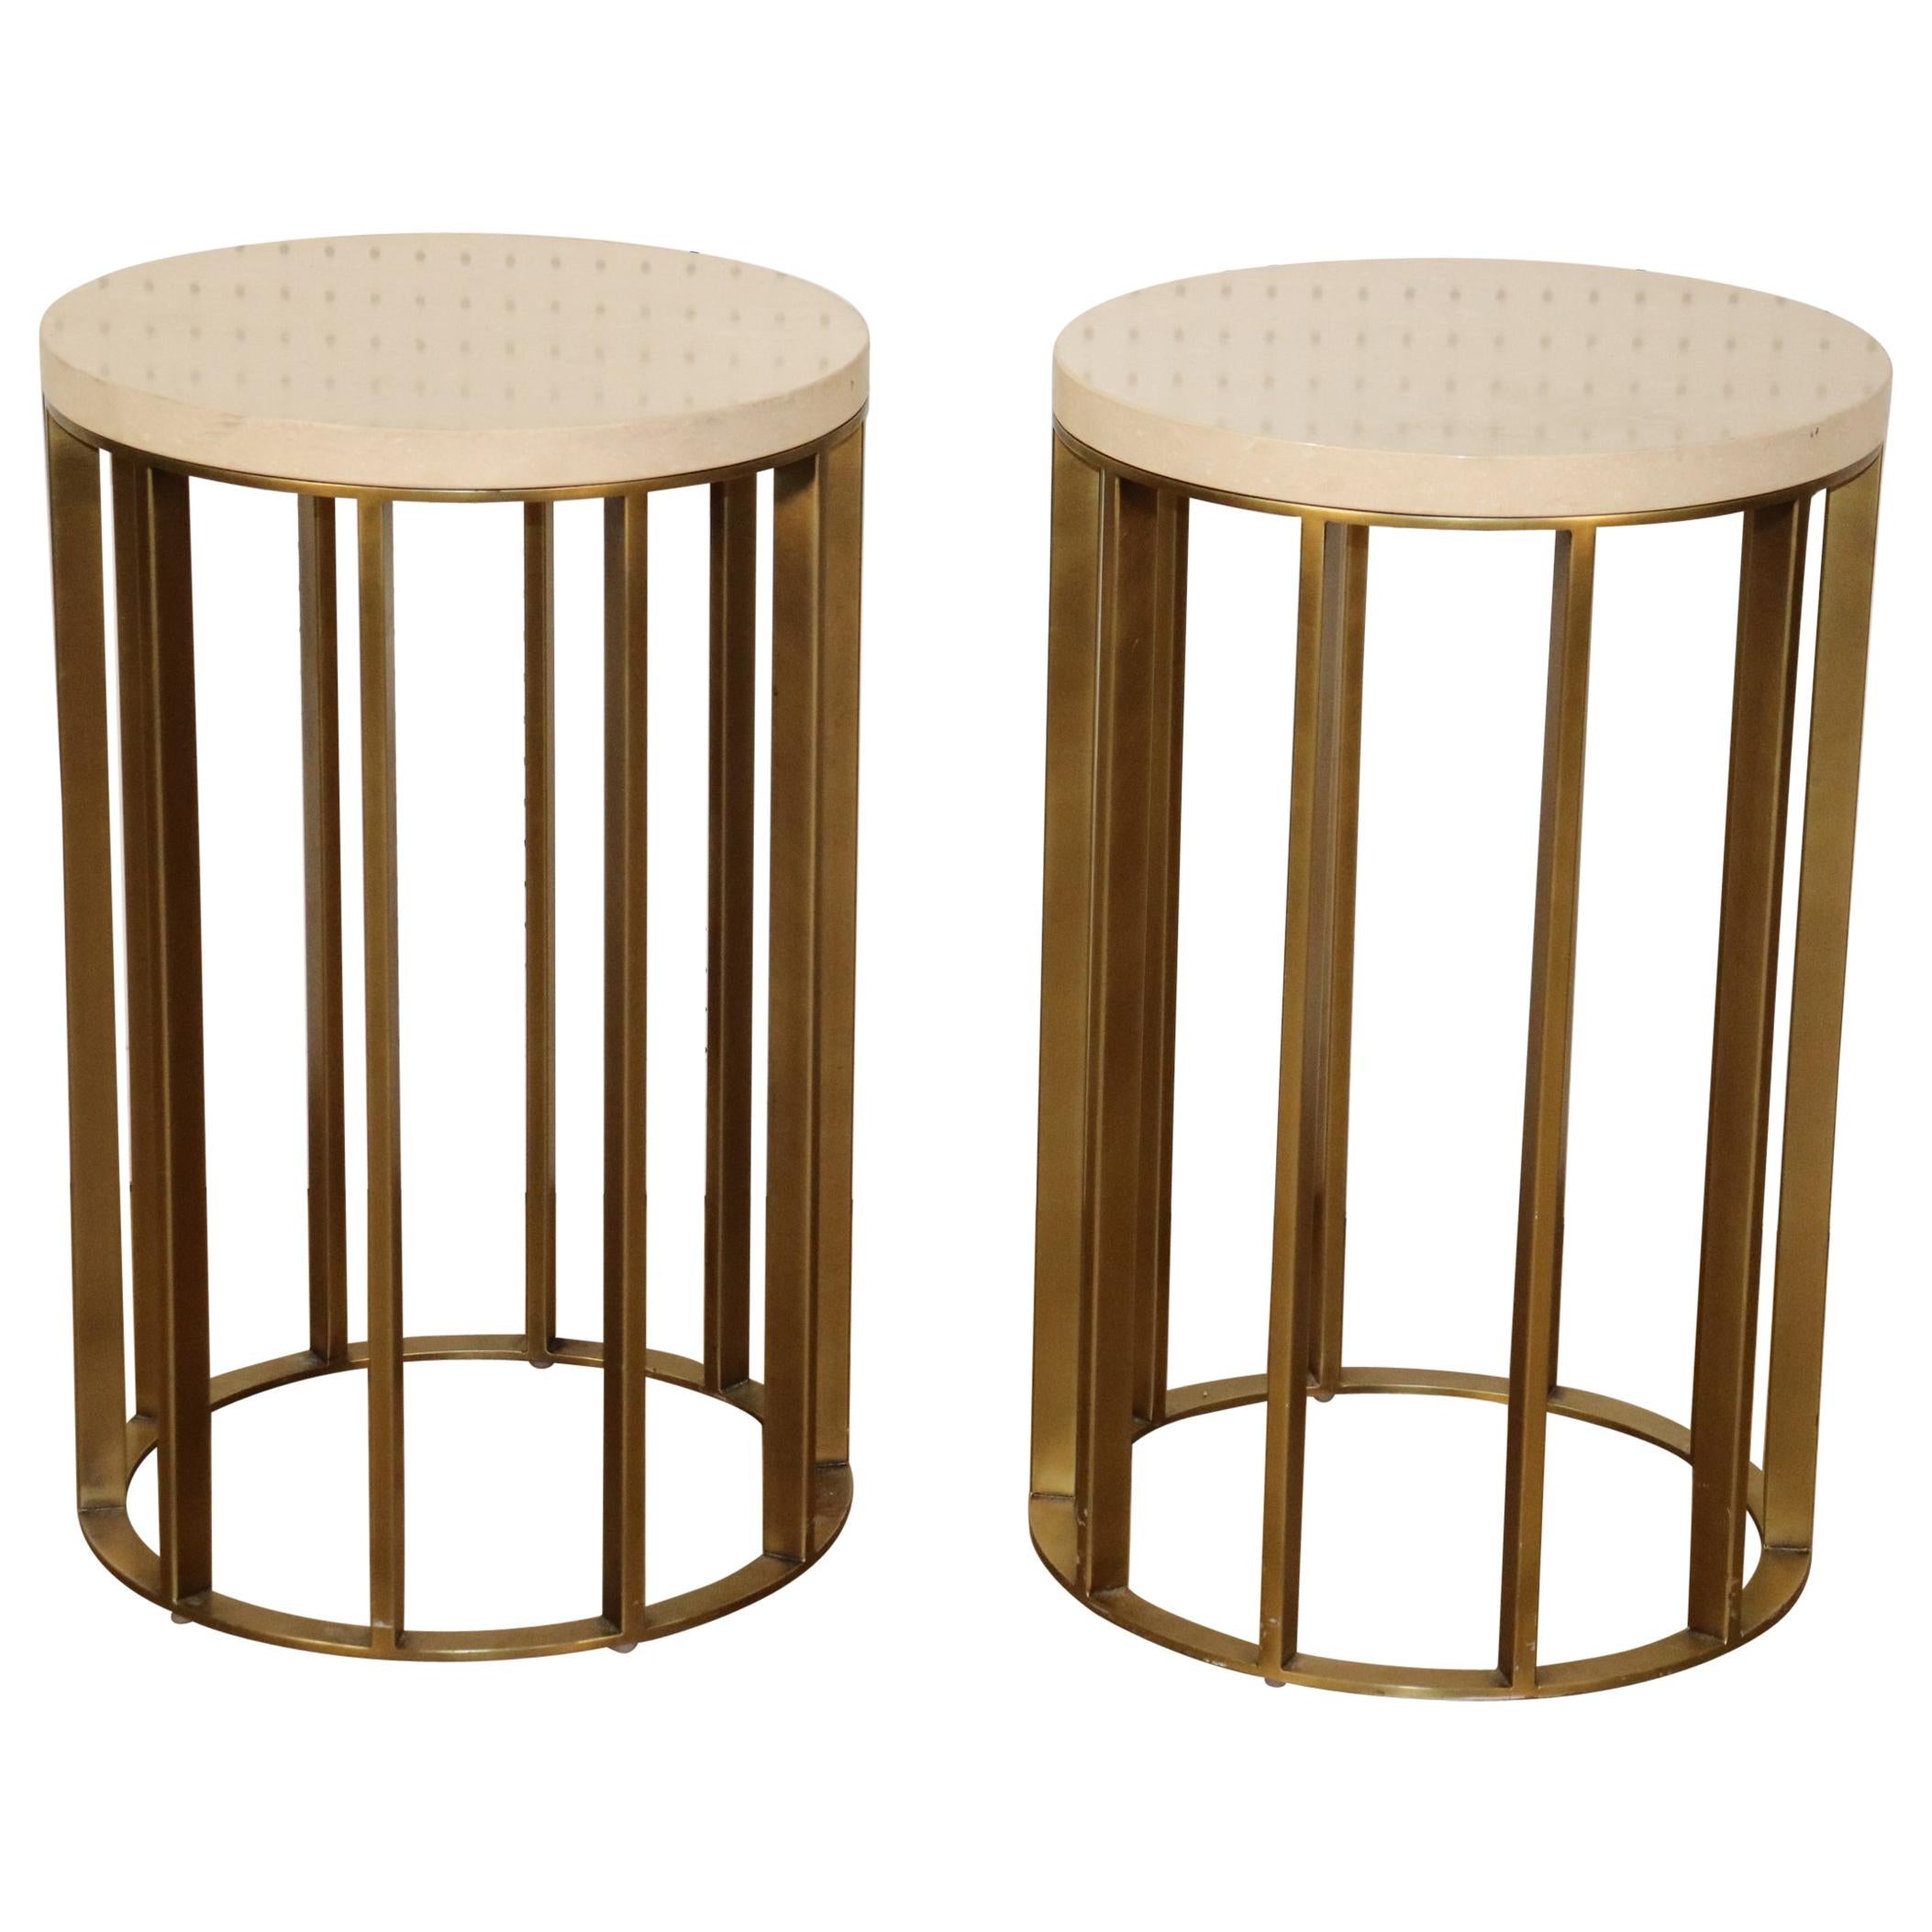 Heavy Marble Top Modern Brass Round End Tables